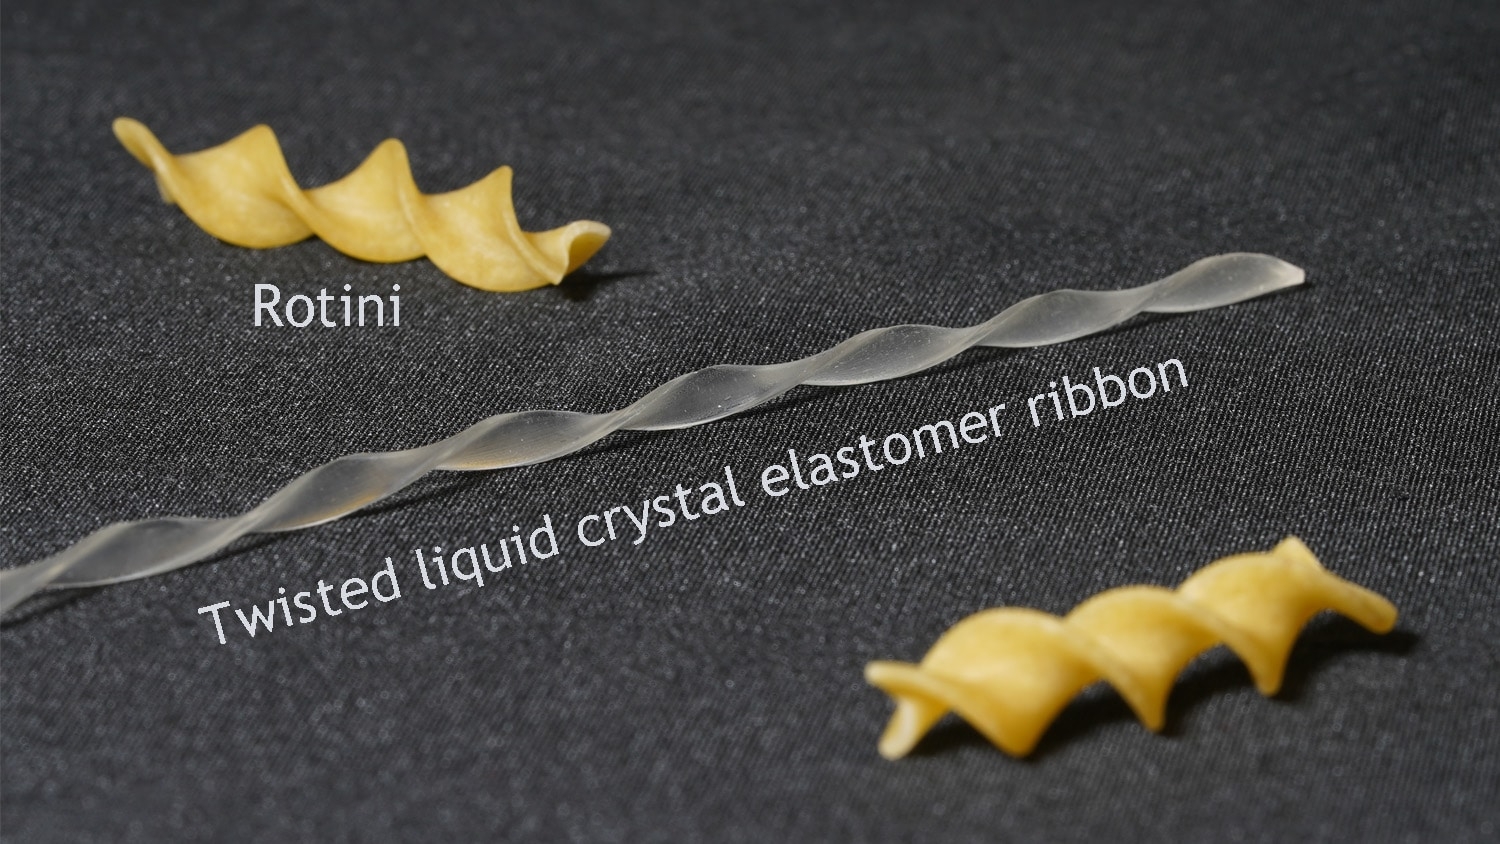 twisted clear polymer "soft robot" lies next to a rotini pasta noodle